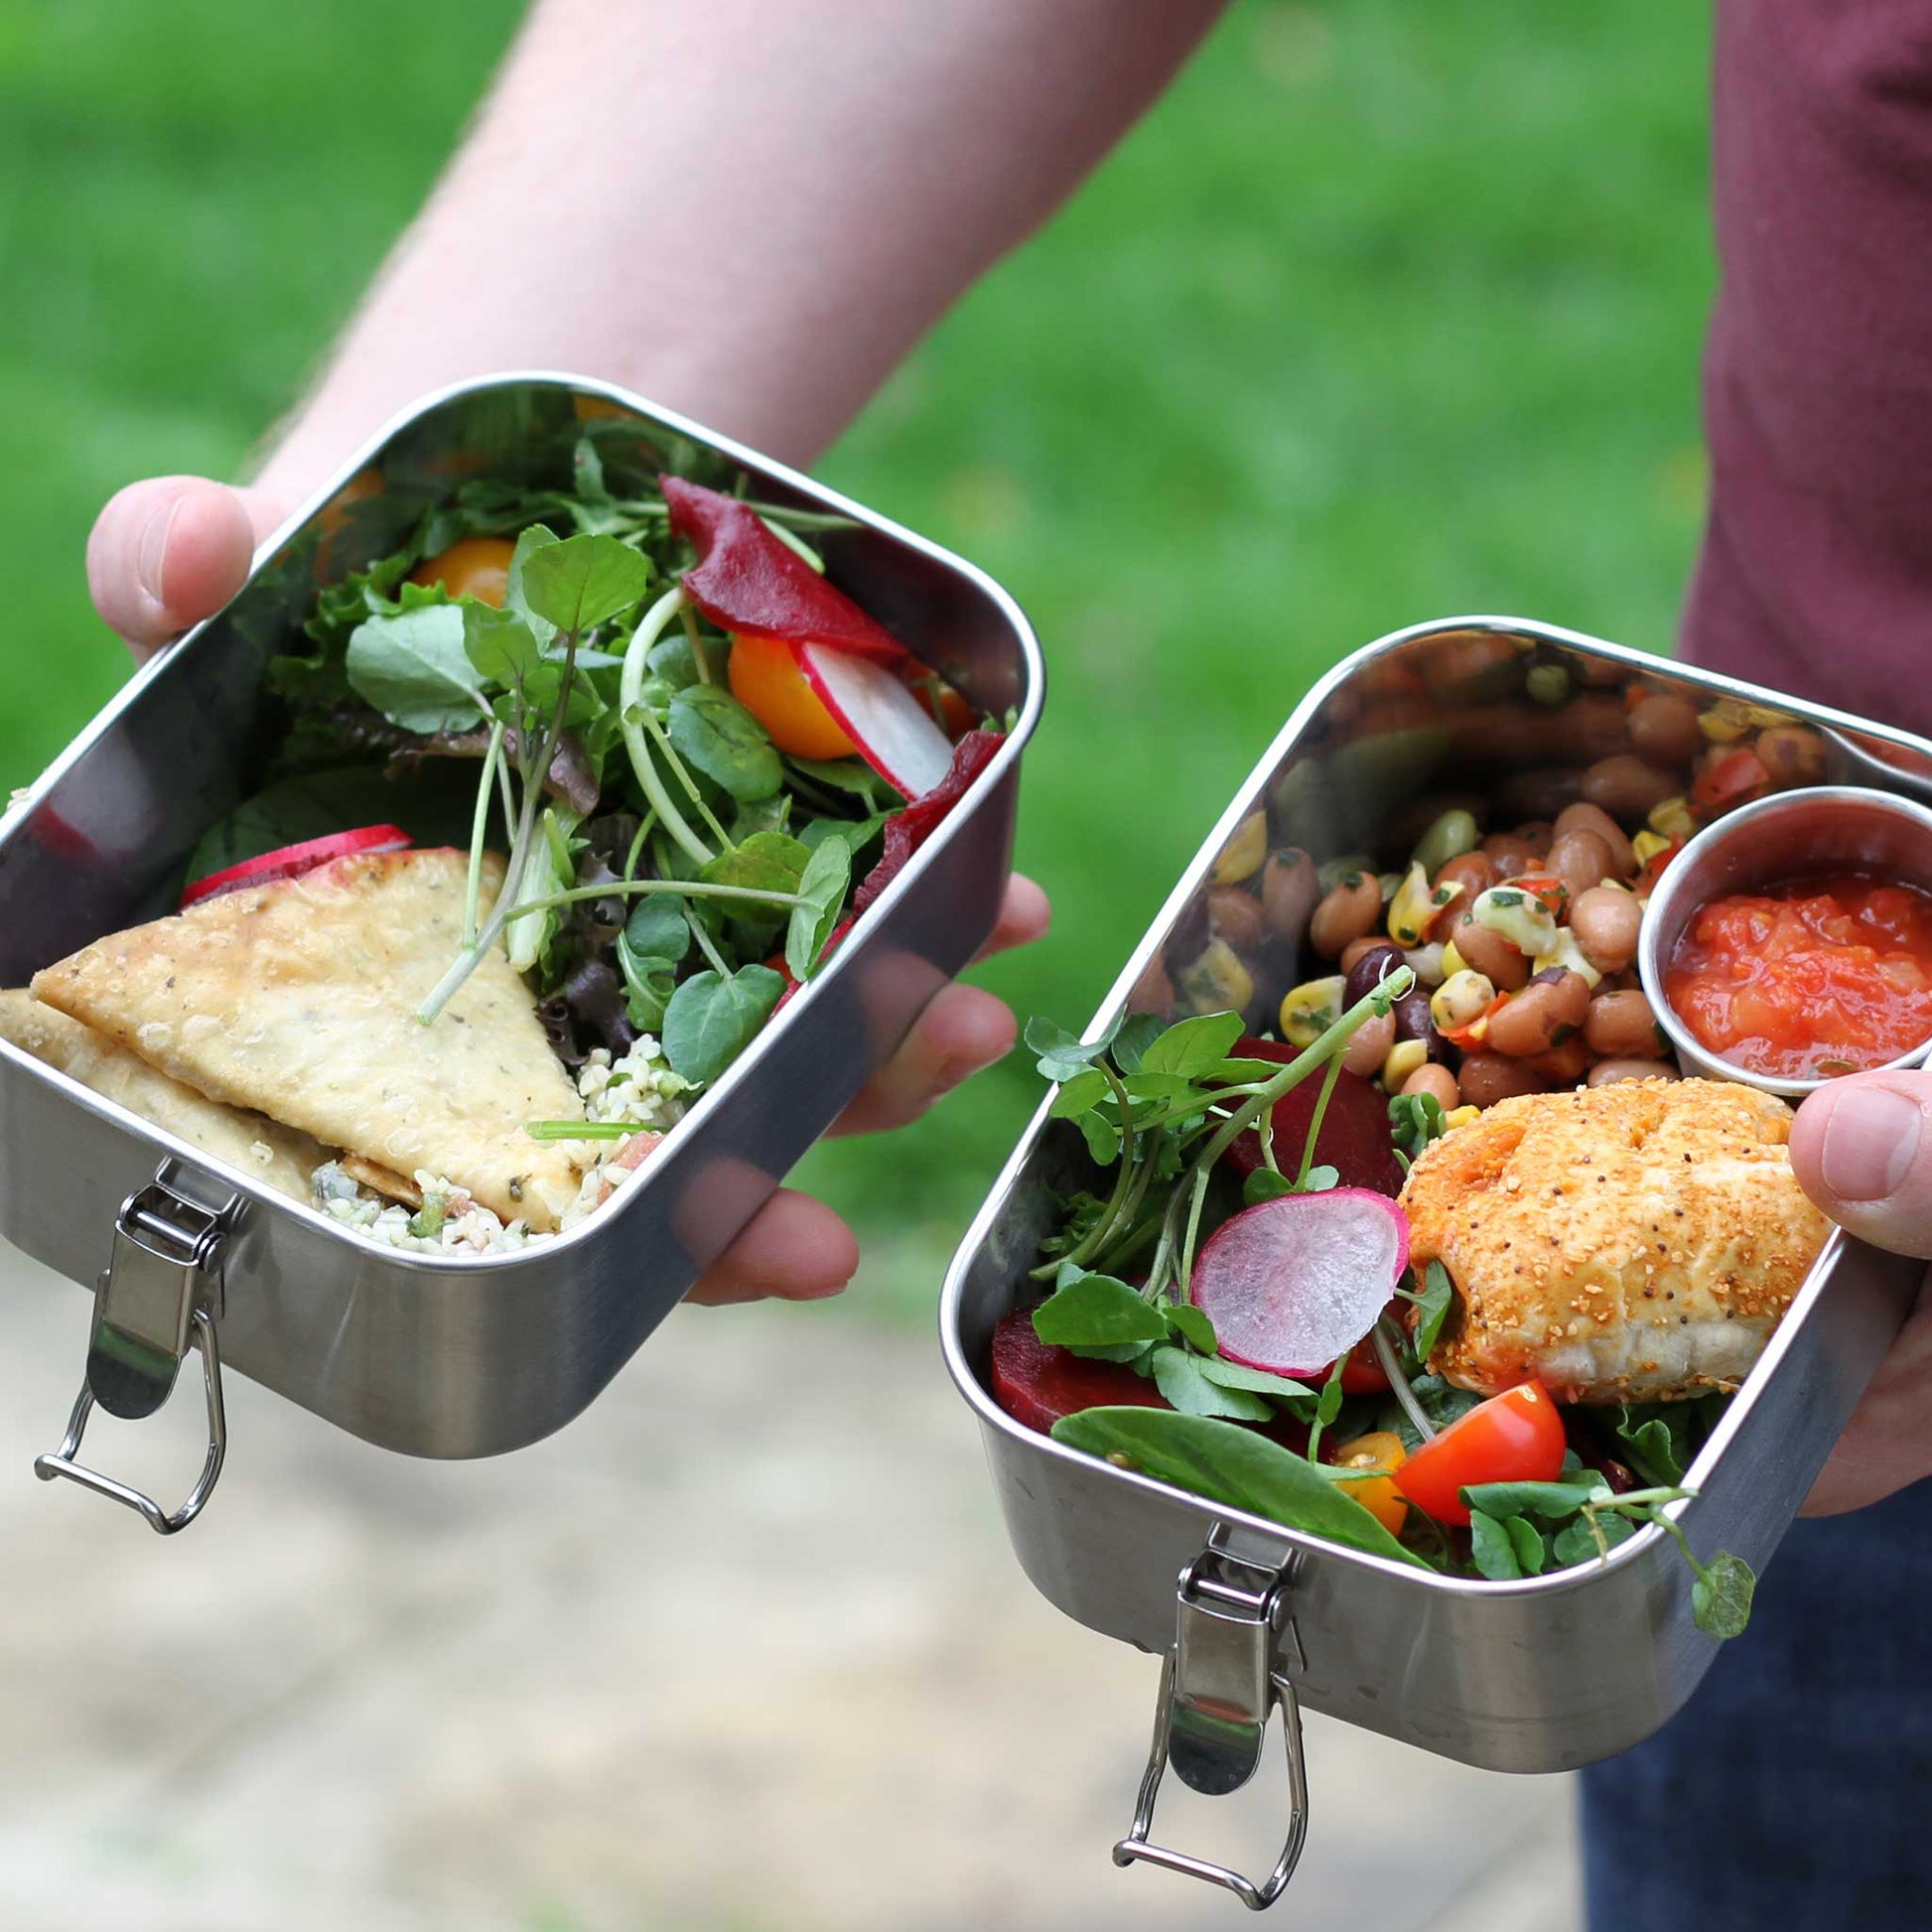 100% Stainless Steel Bento Lunch Boxes